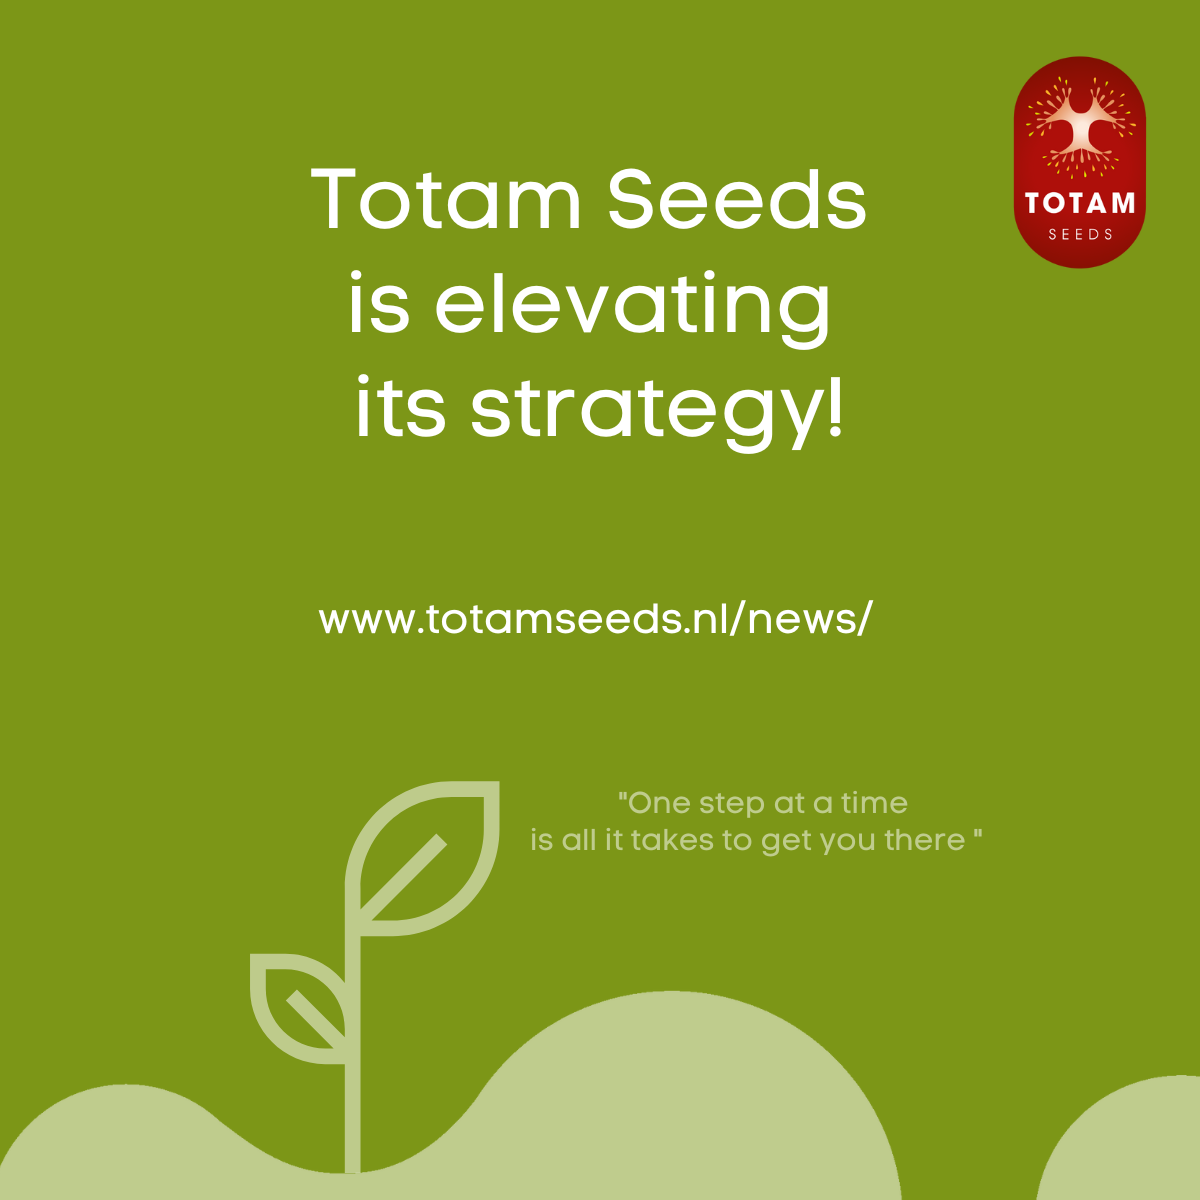 Totam Seeds is elevating its strategy!